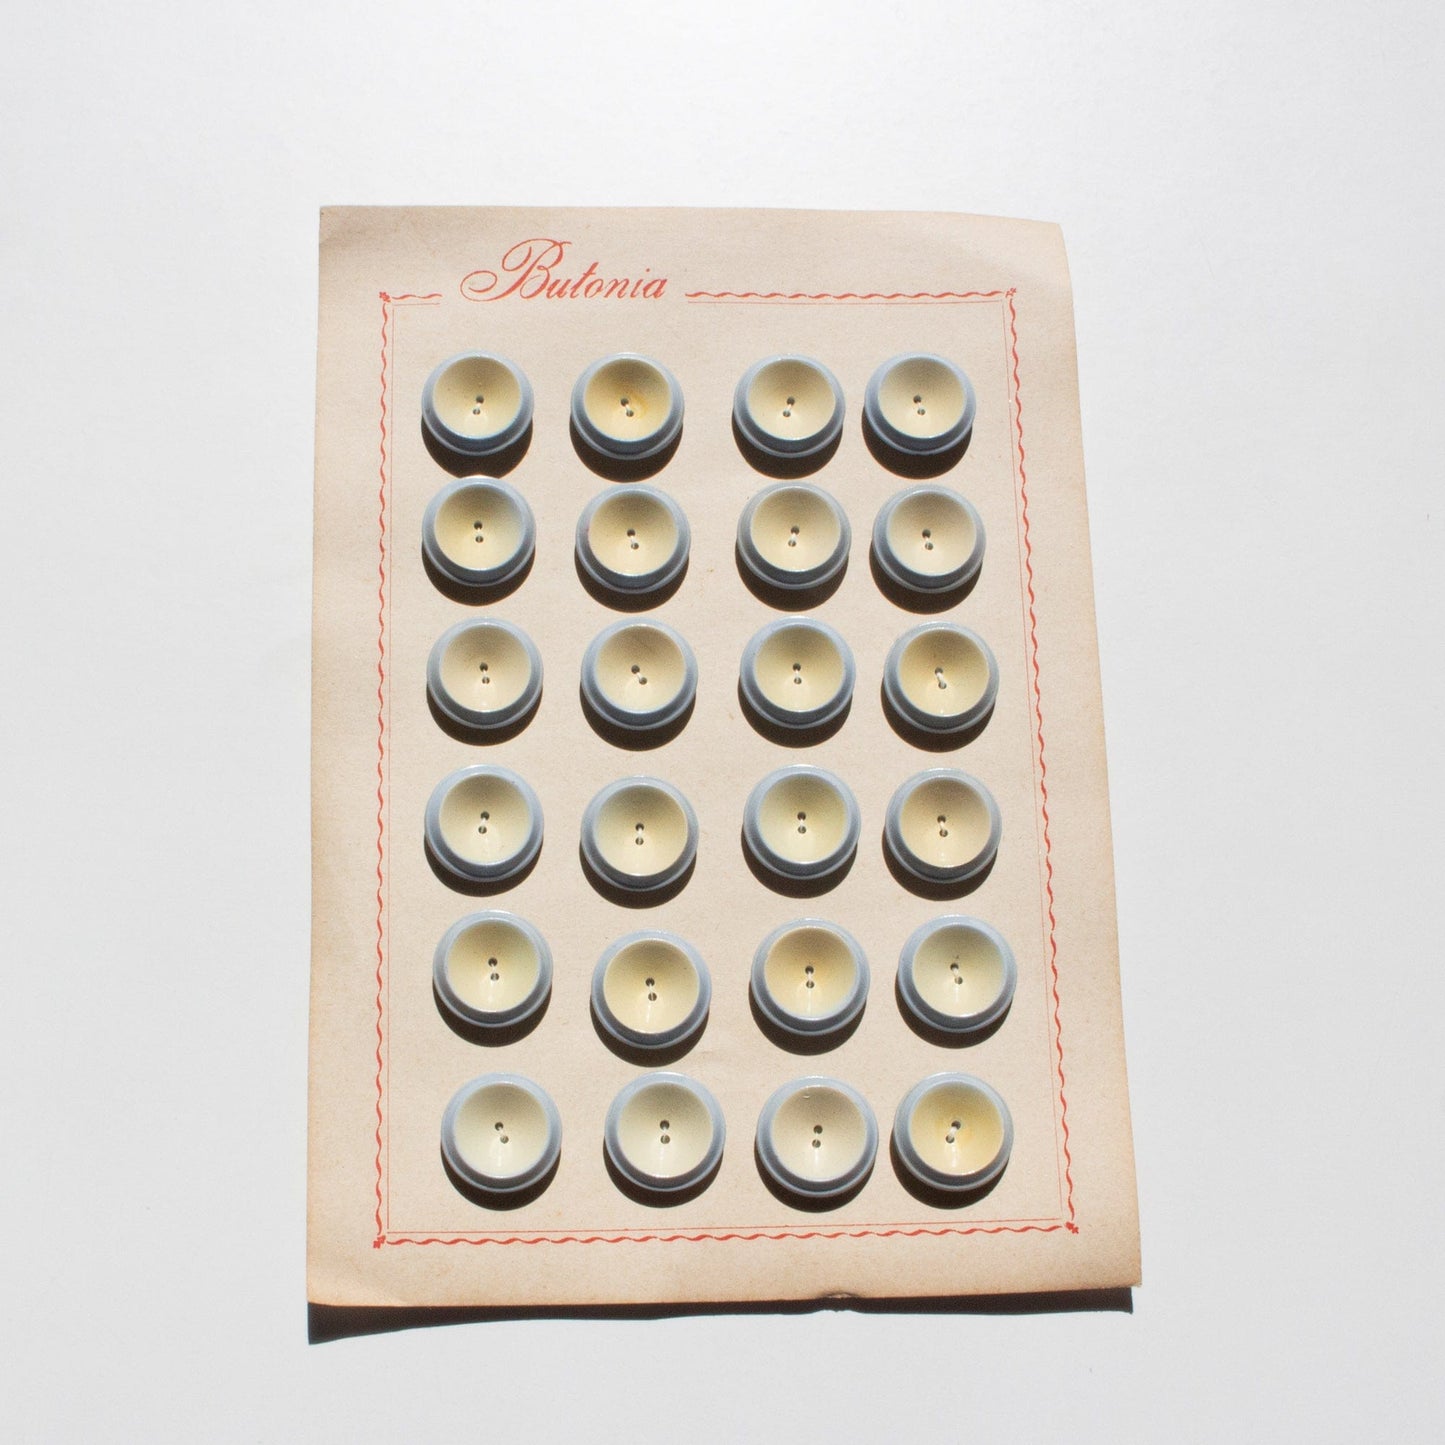 6 Vintage Italian Plastic Buttons in Cream and Grey - 20 mm